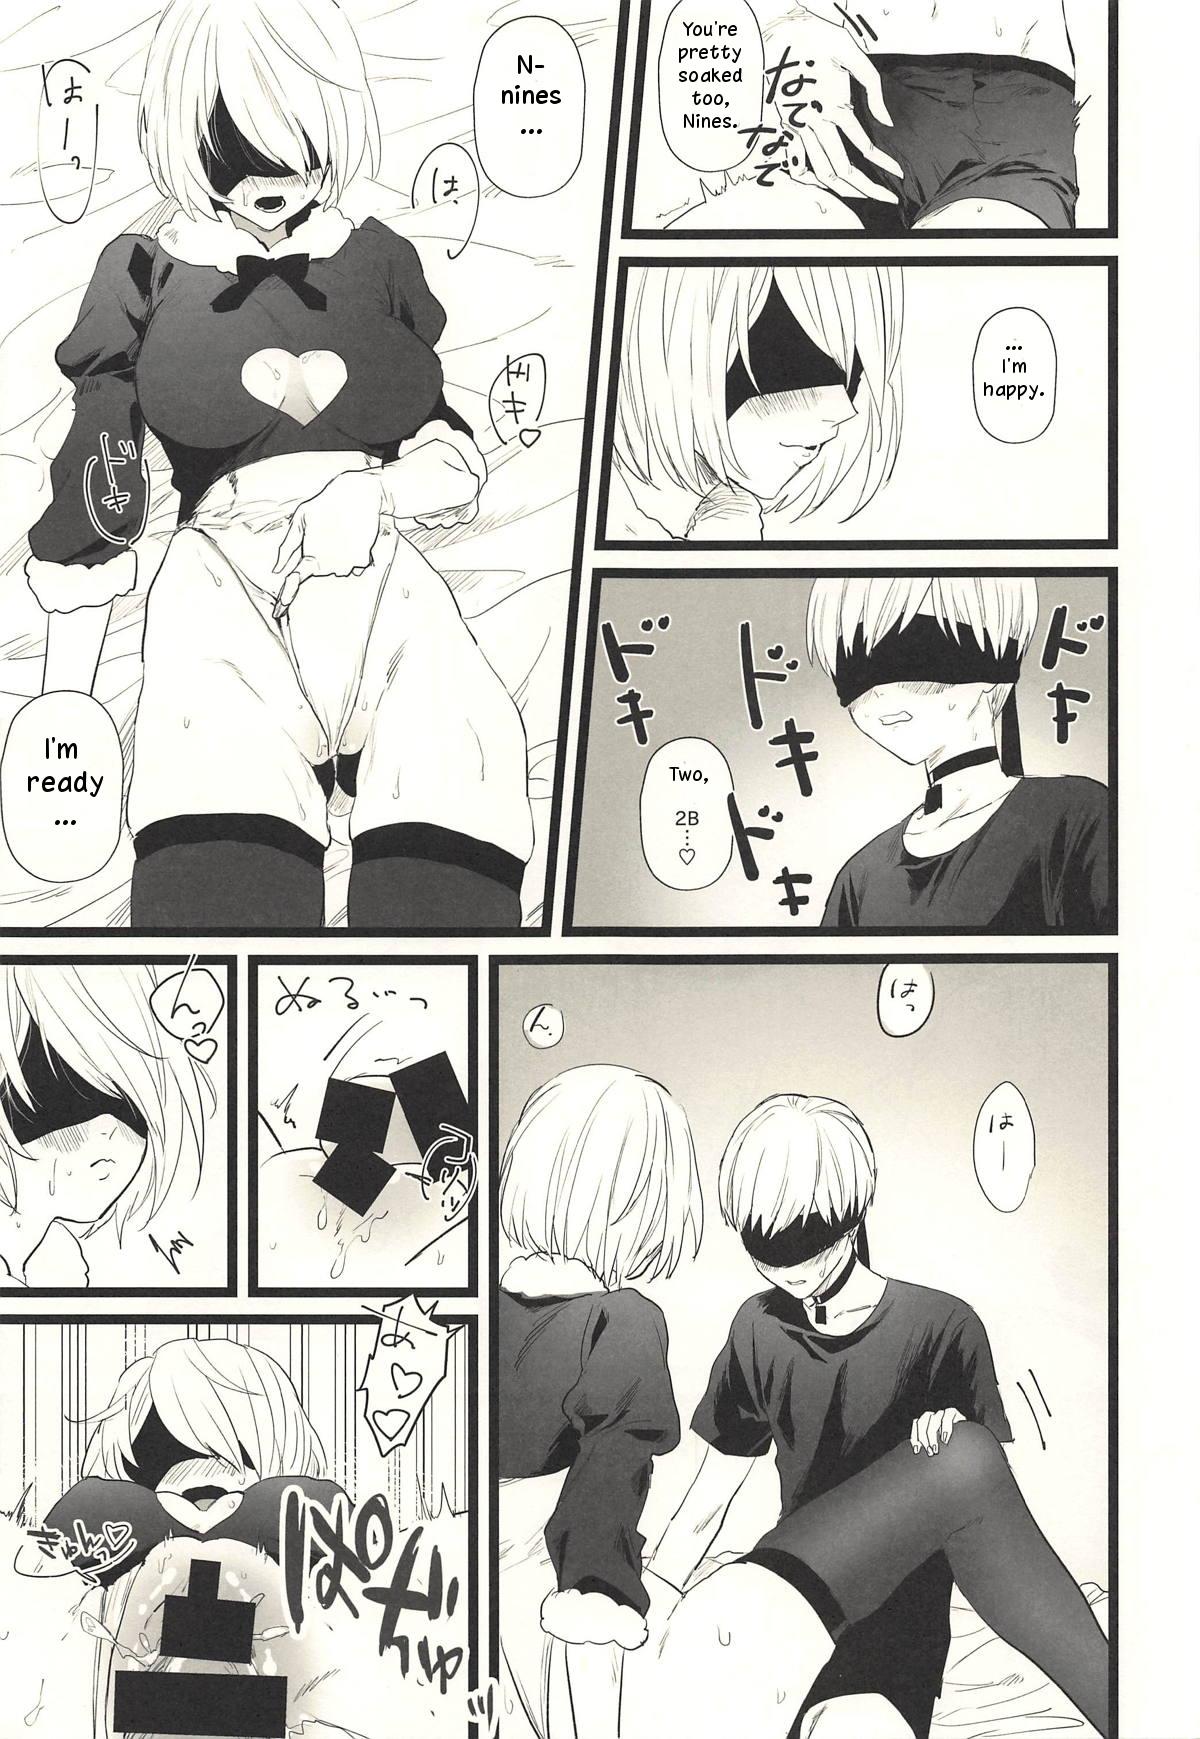 Newbie ONE MORE TIME - Nier automata Butt - Page 10